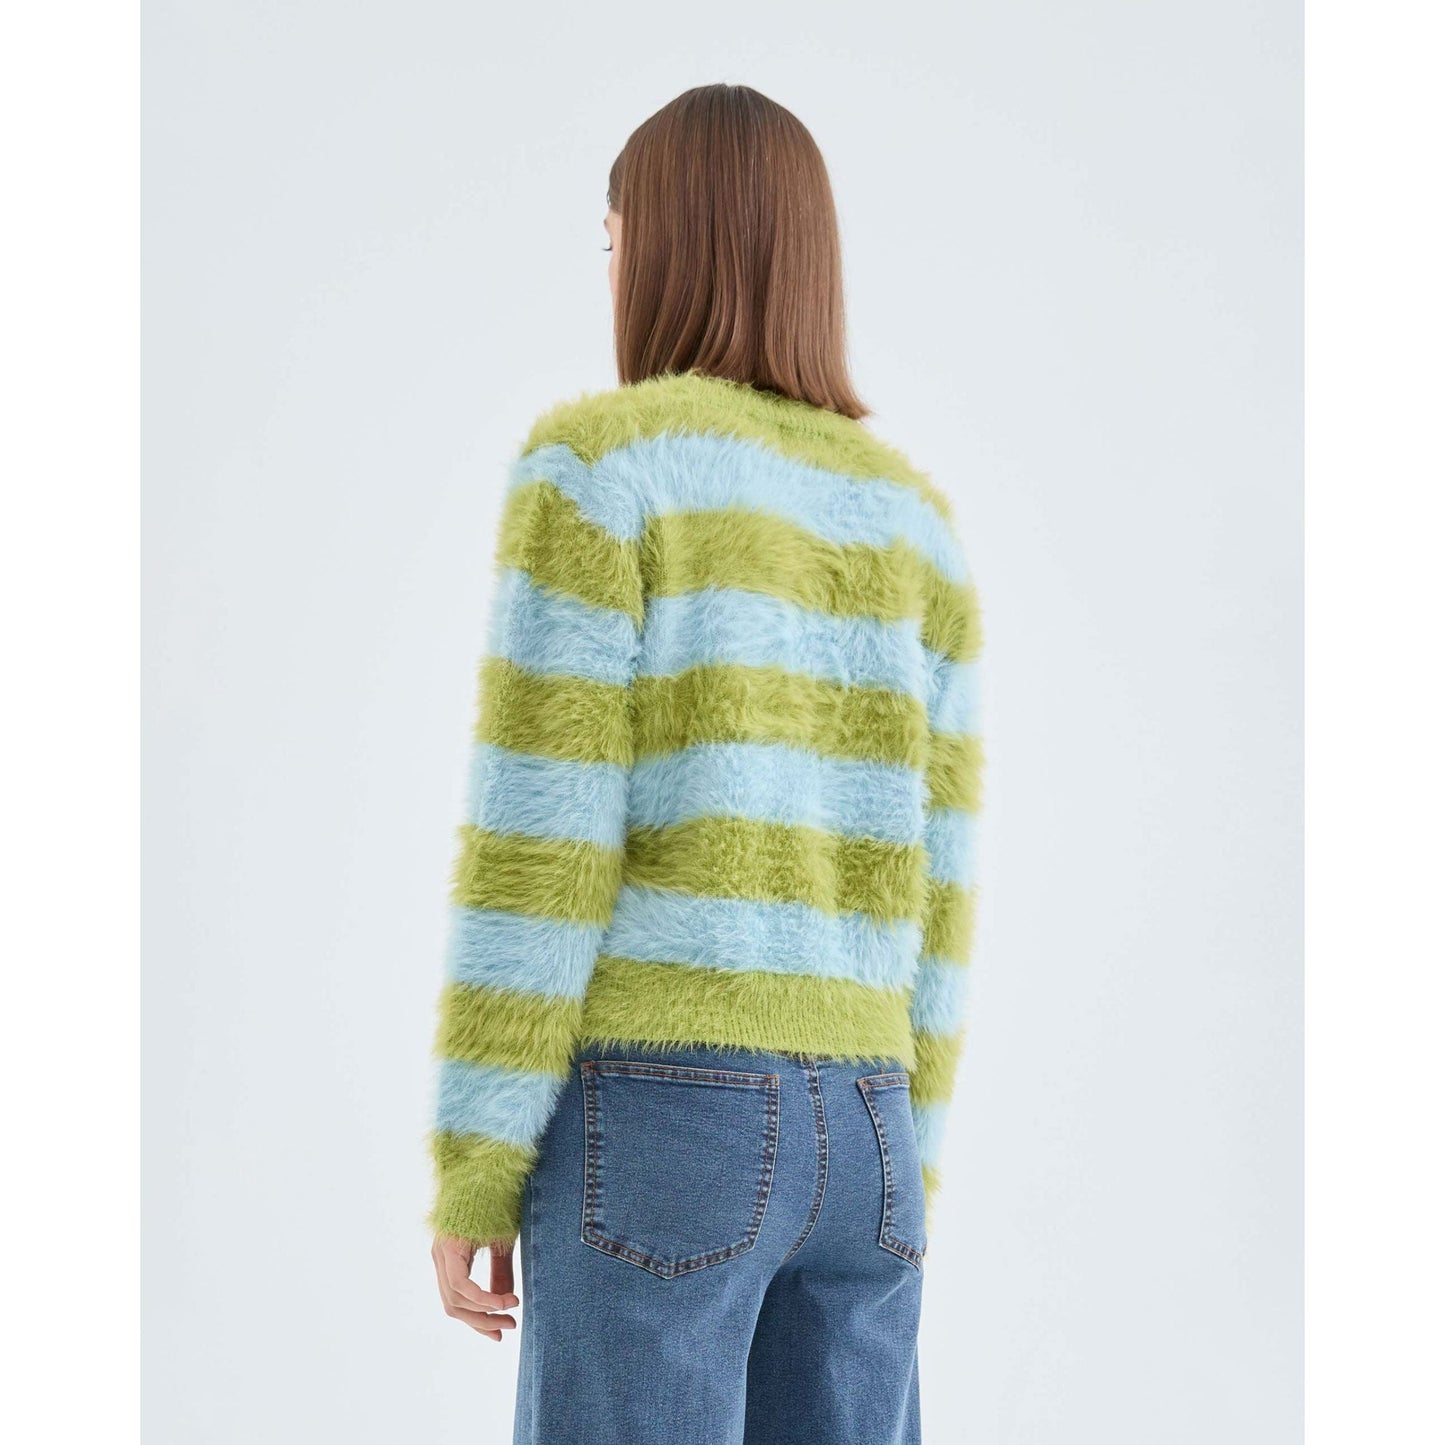 Compania Fantastica - Green and Blue Textured Striped Knit Sweater